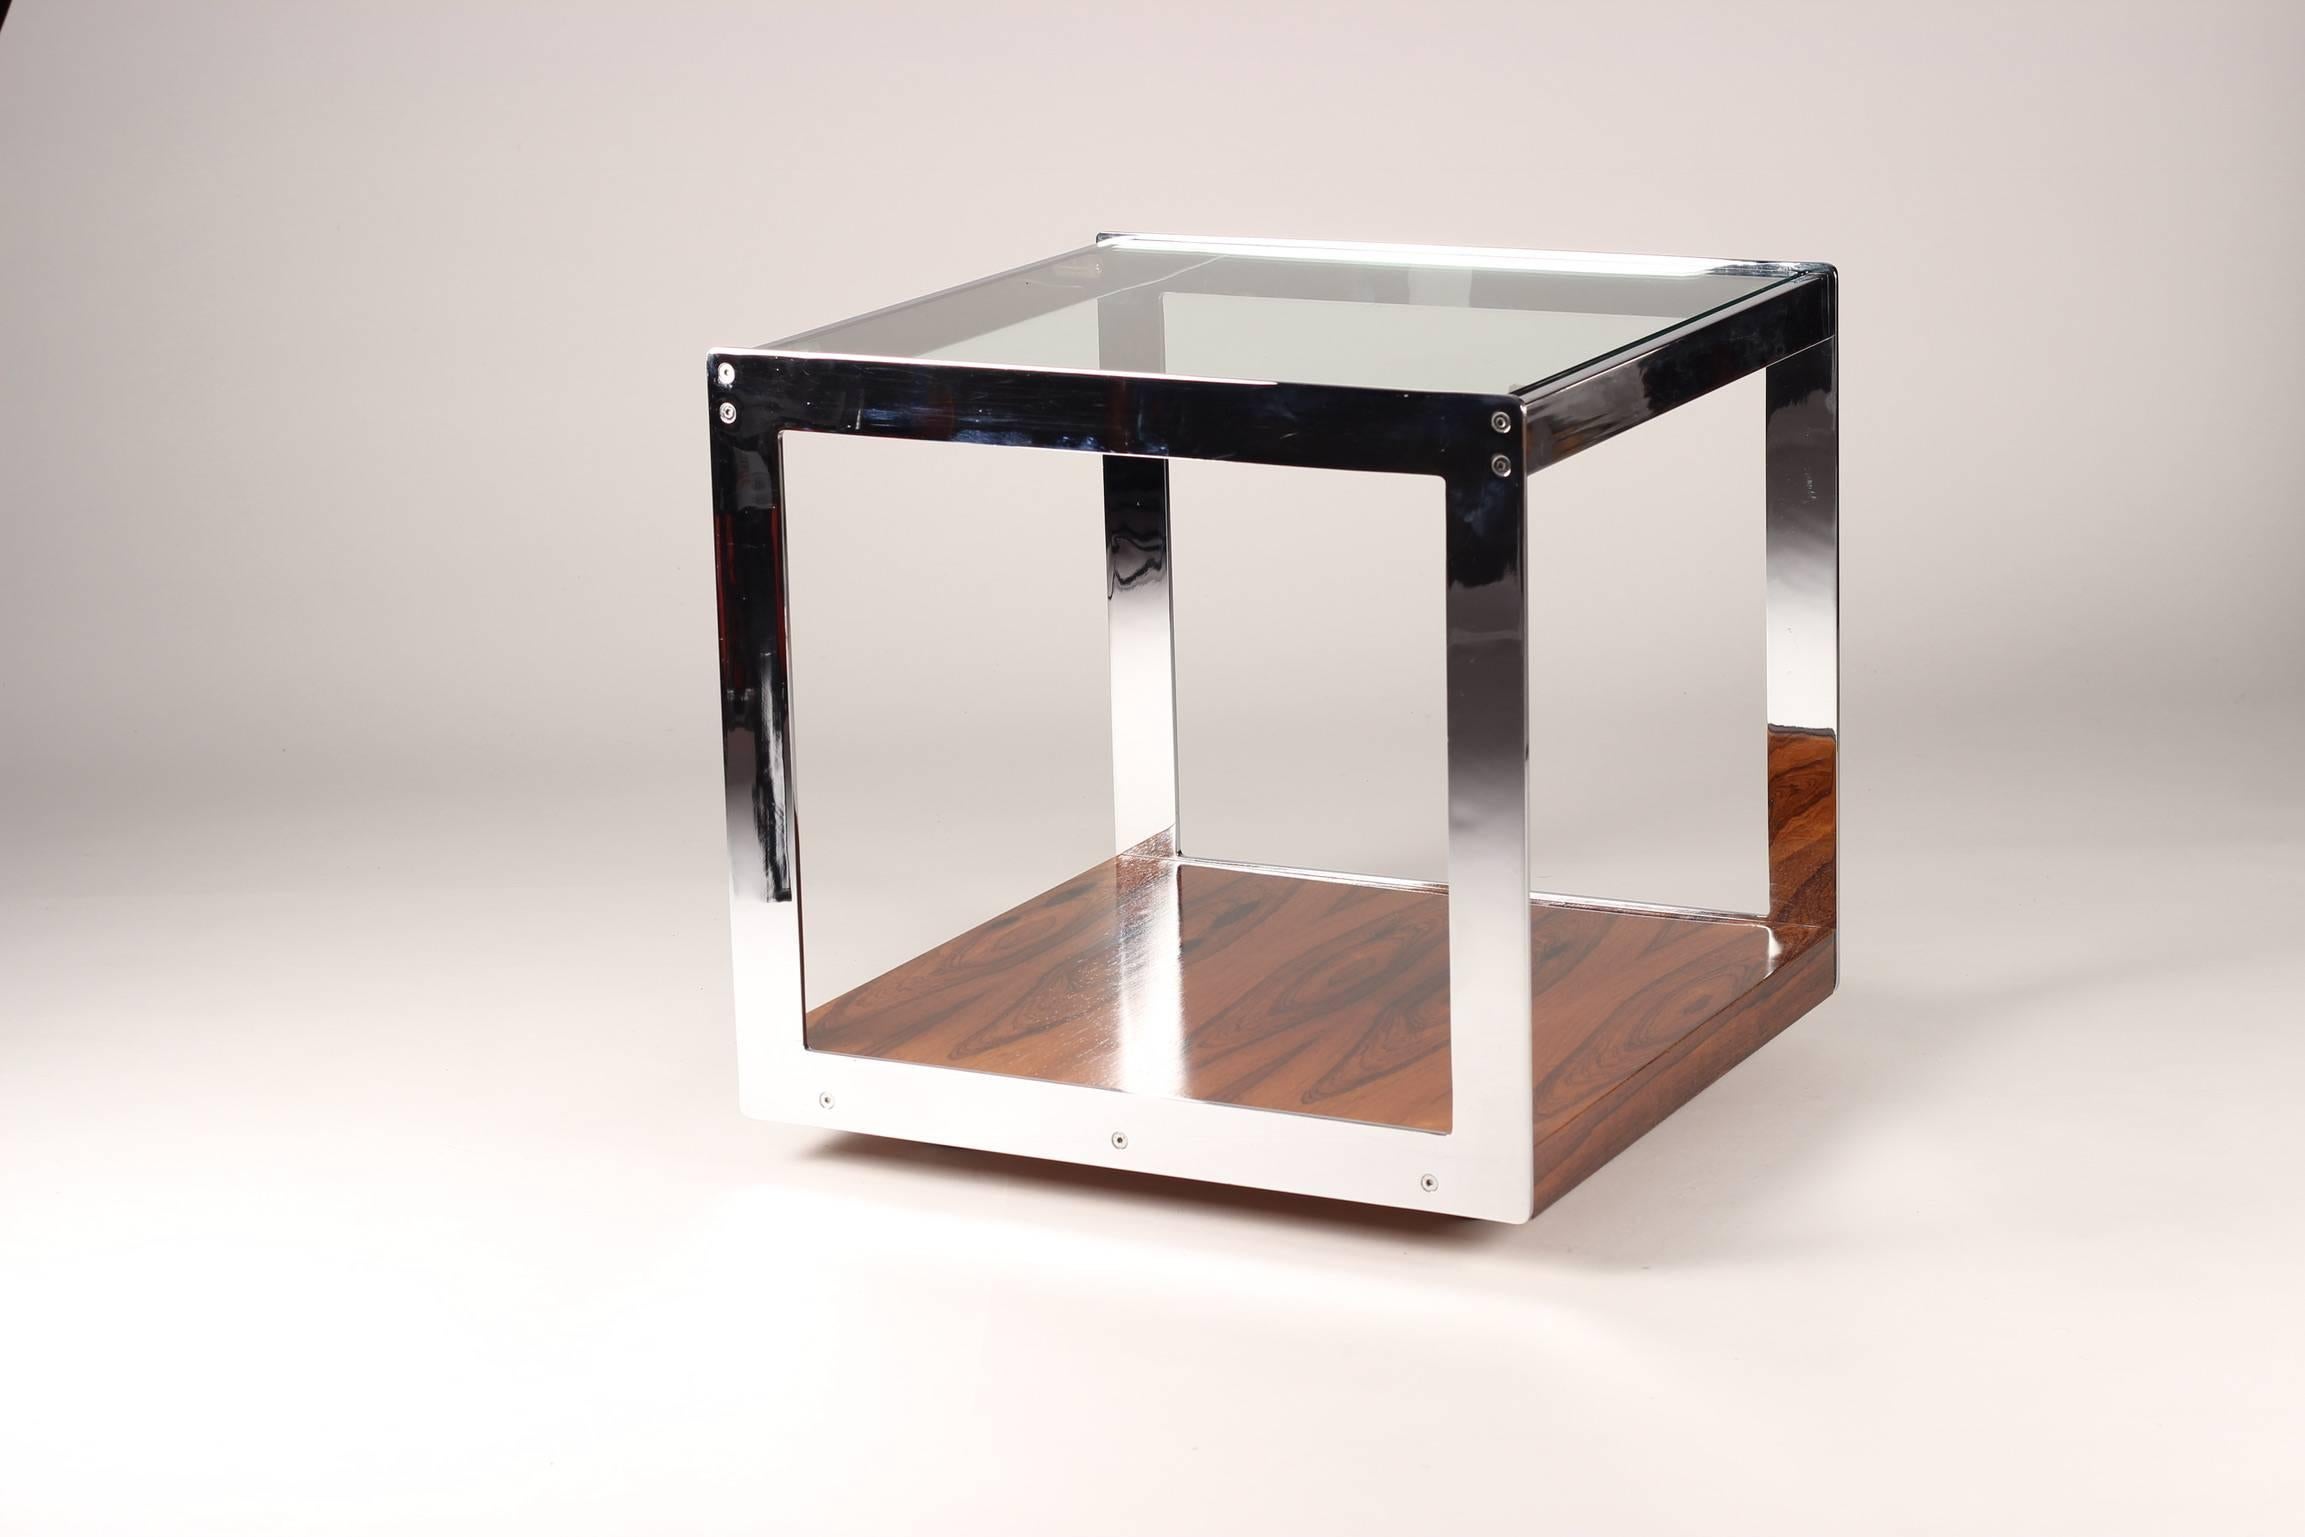 Designed by Richard Young for Merrow Associates and sold through Harrods of London in the 1970s. This rare Brazilian rosewood, chrome and glass table can be moved easily into and out of position with its concealed casters. The piece has a very